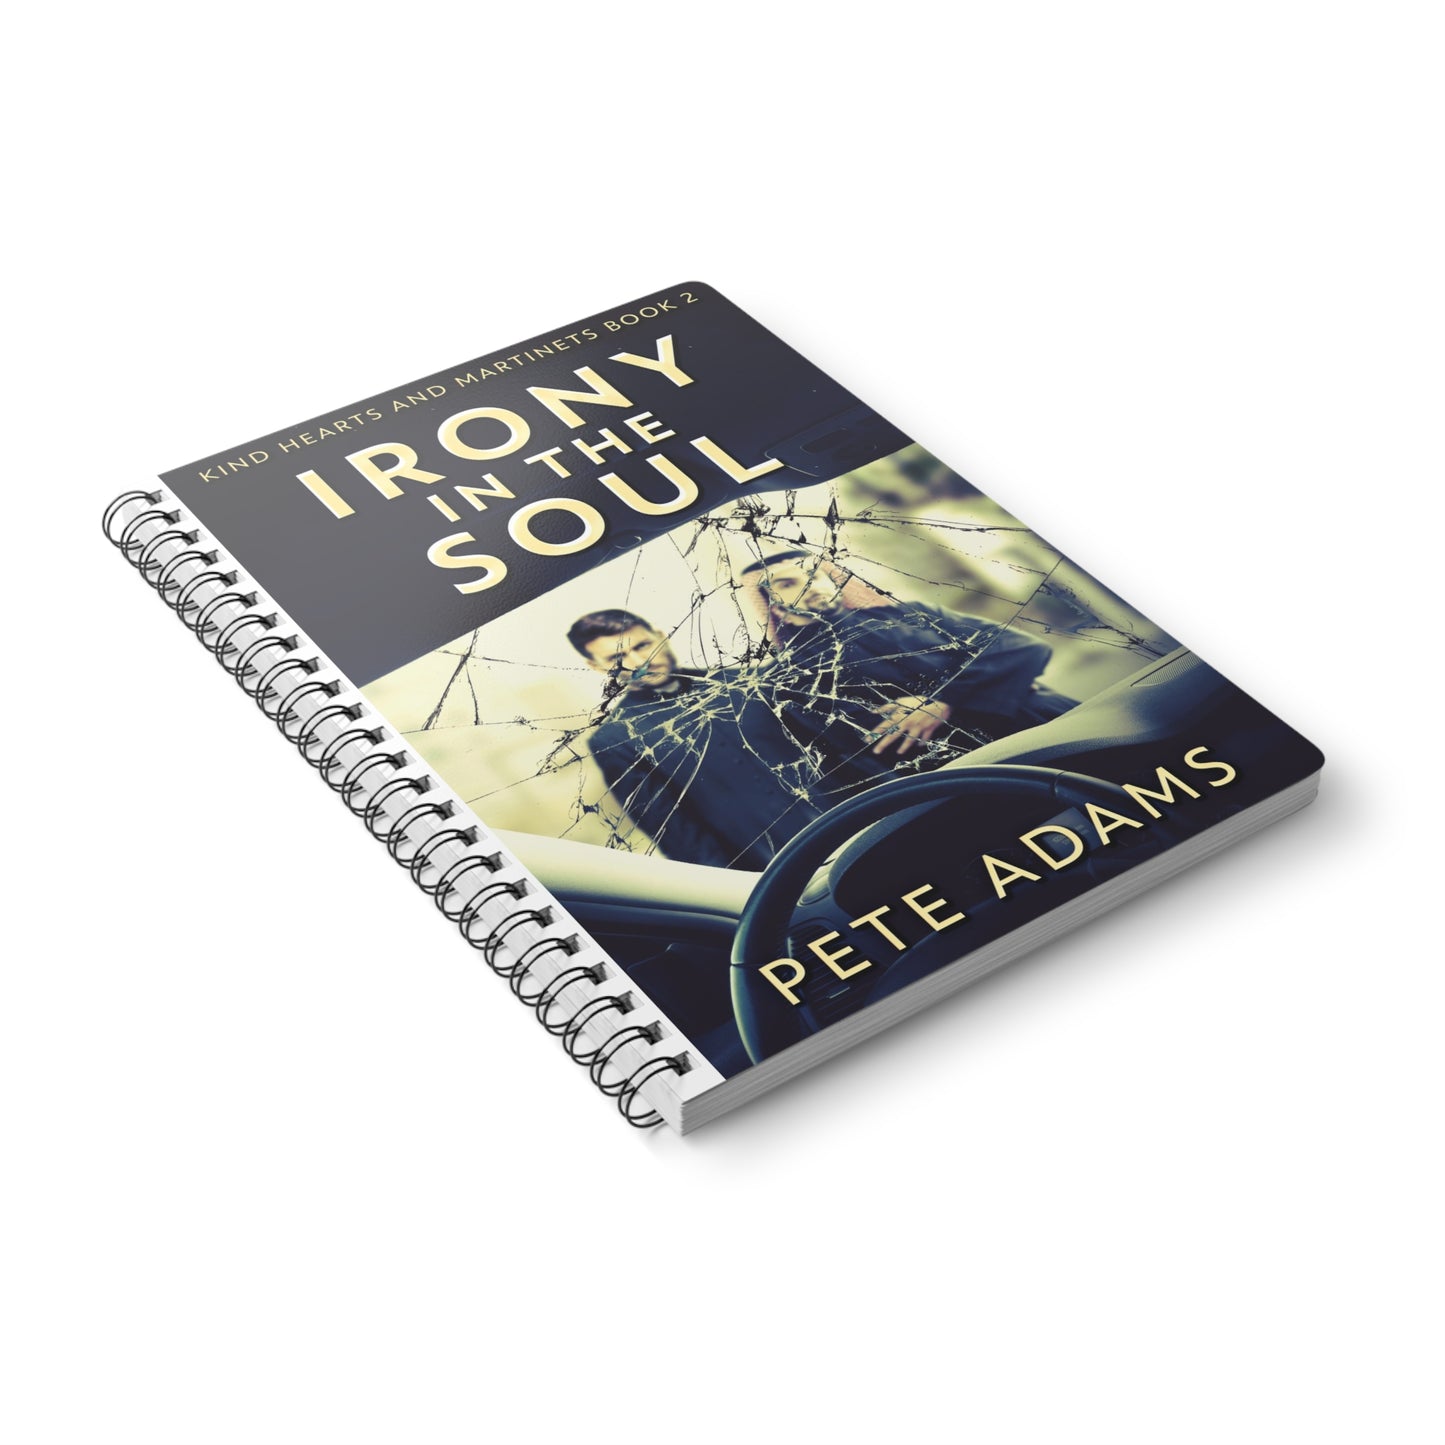 Irony In The Soul - A5 Wirebound Notebook